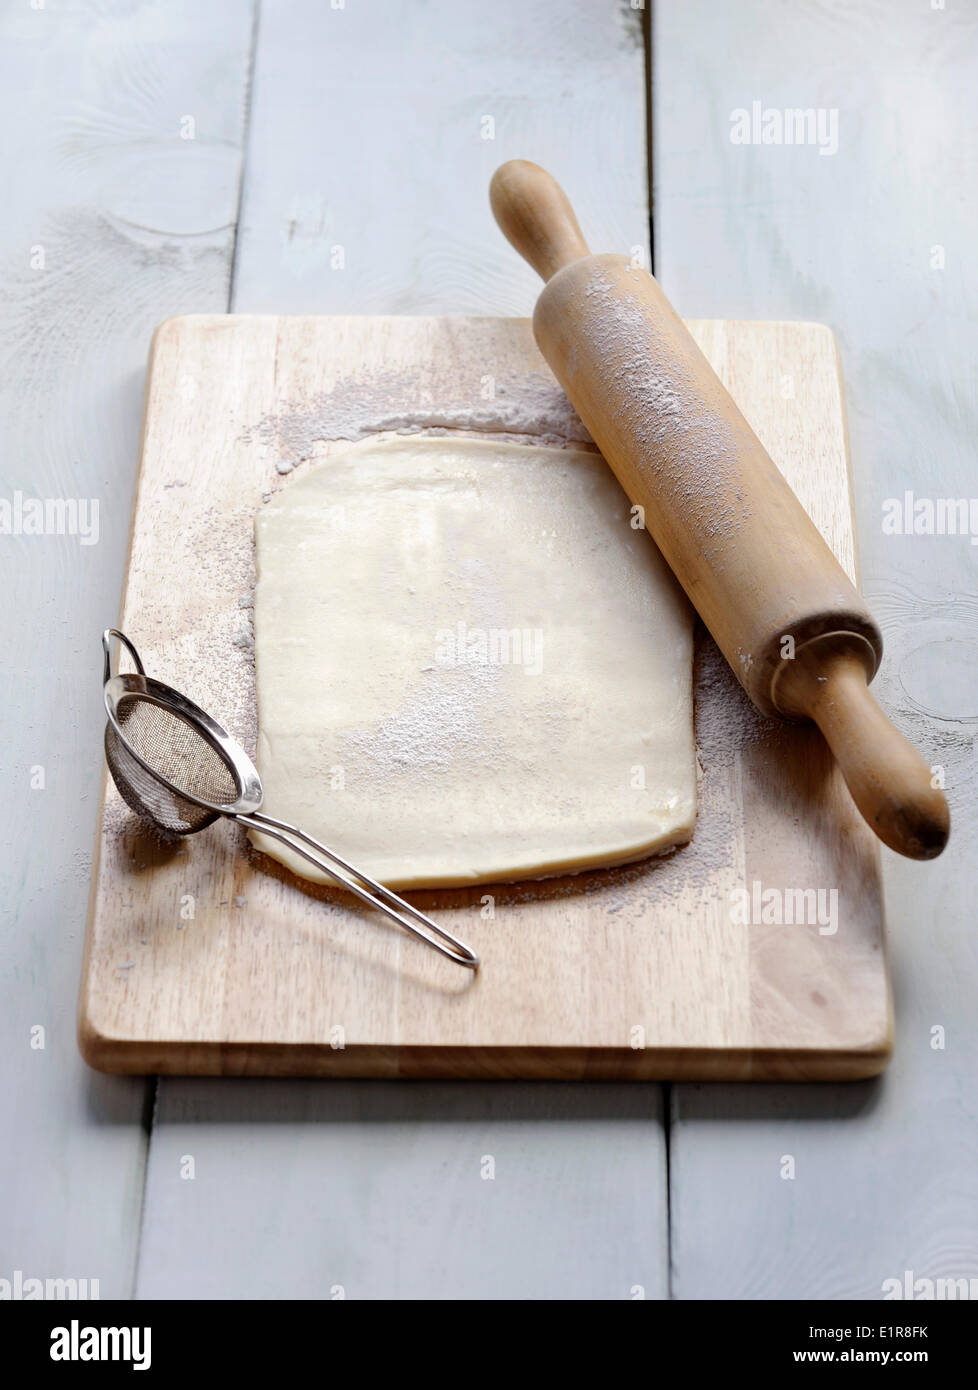 Spread the dough with a rolling pin Stock Photo